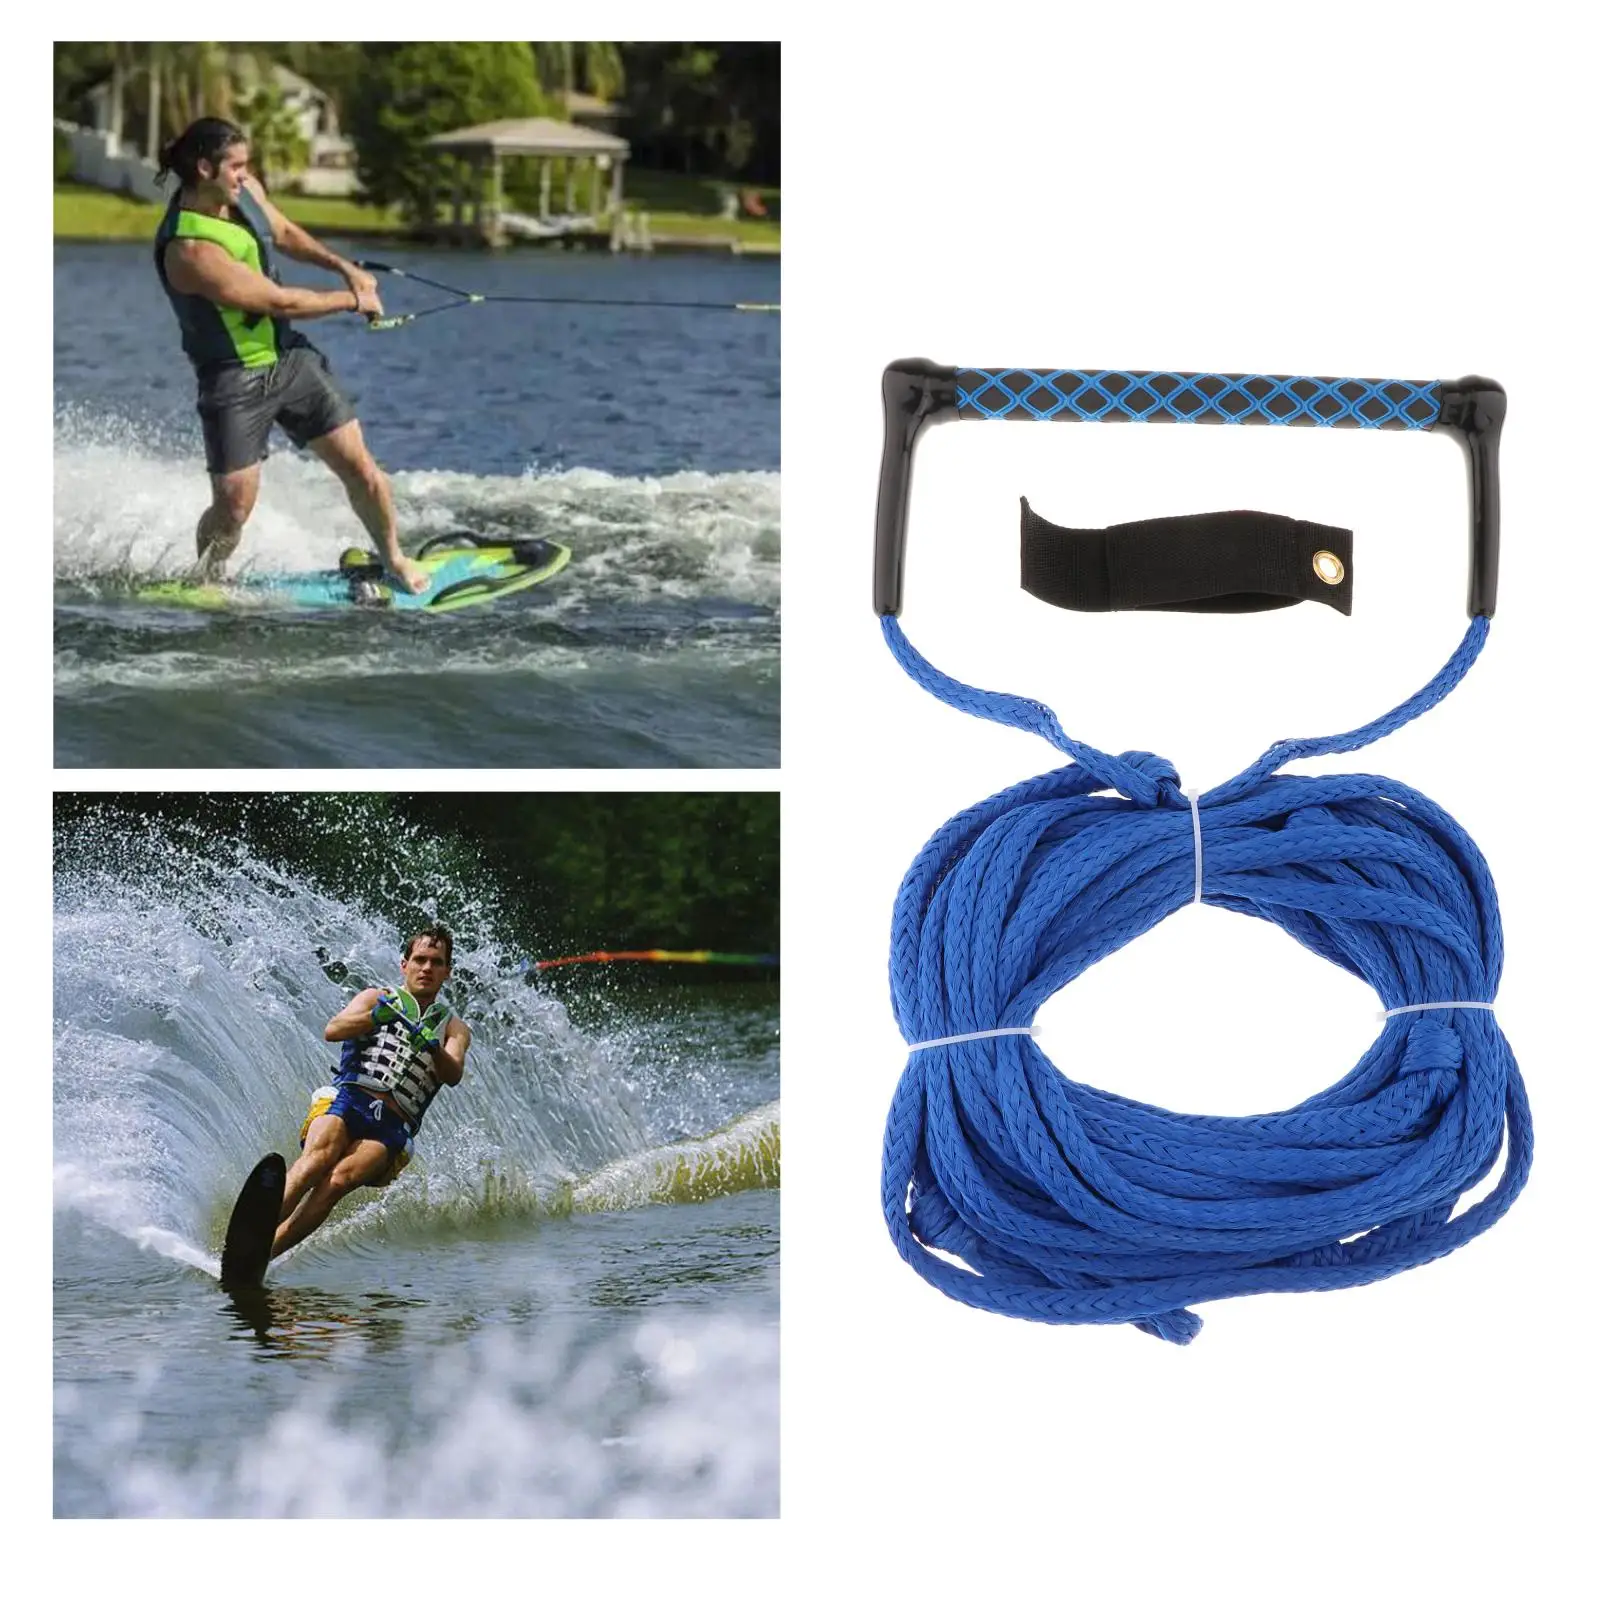 4 Sections Watersports Tow Rope for Tubing MAYAPHILOS 75ft Wakeboard Water Ski Kneeboard Rope with 15in Floating Handles 